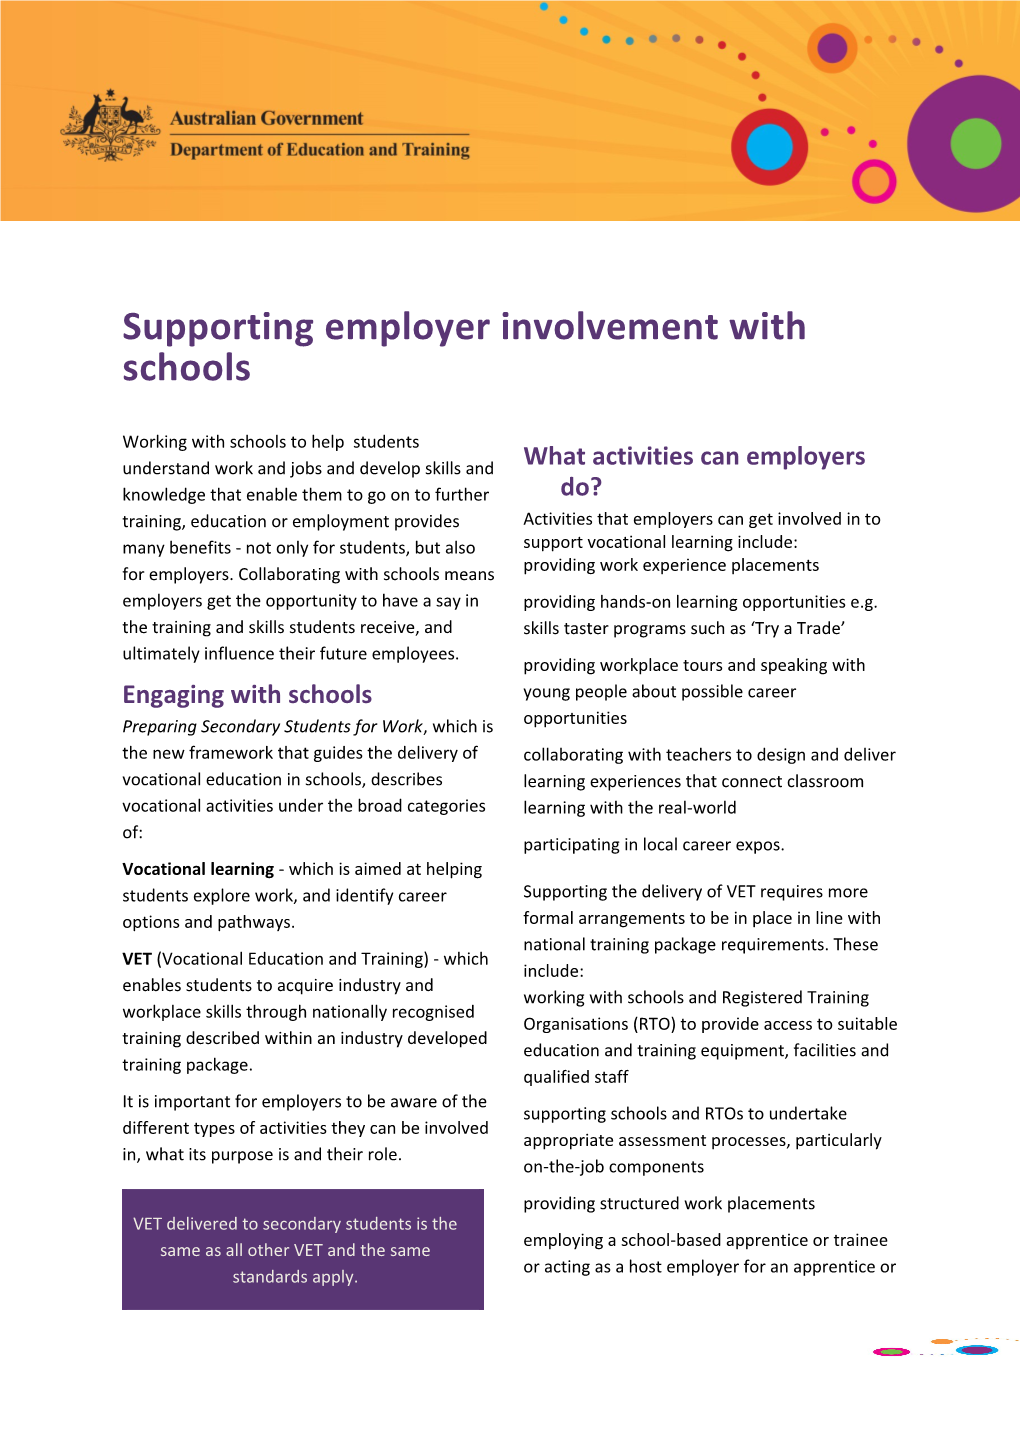 Supporting Employer Involvement with Schools